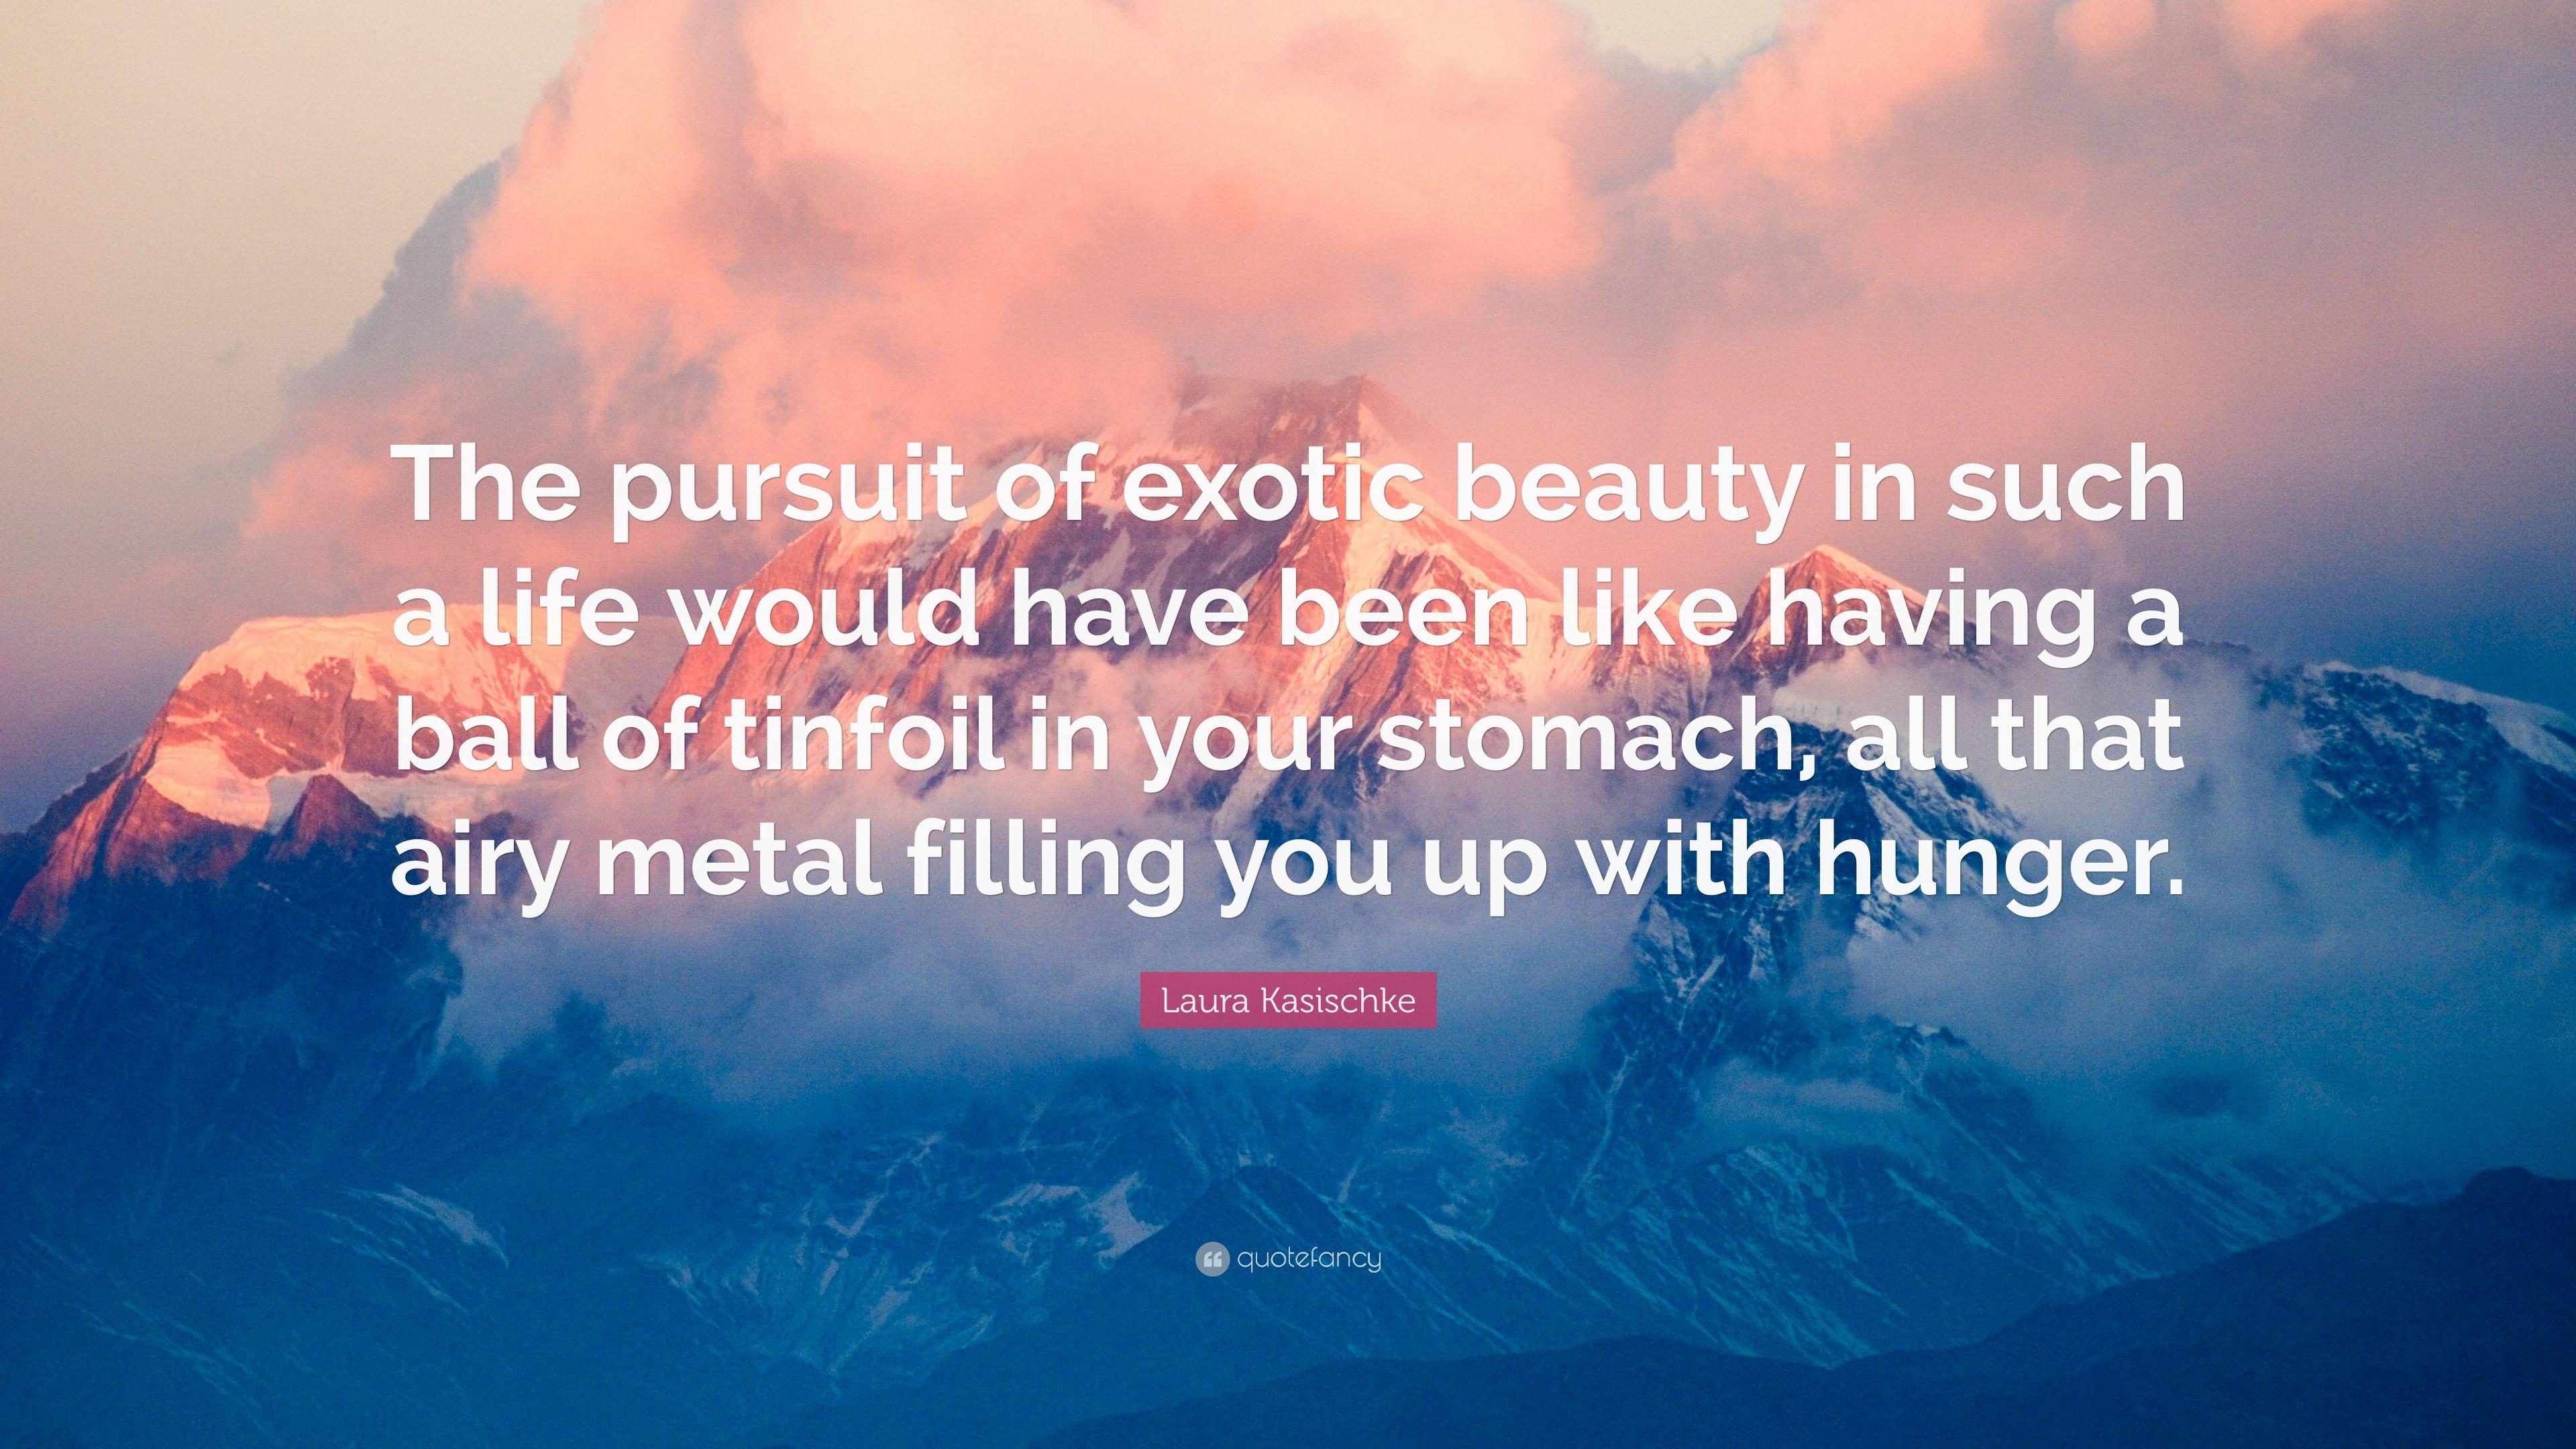 Laura Kasischke Quote: “The pursuit of exotic beauty in such